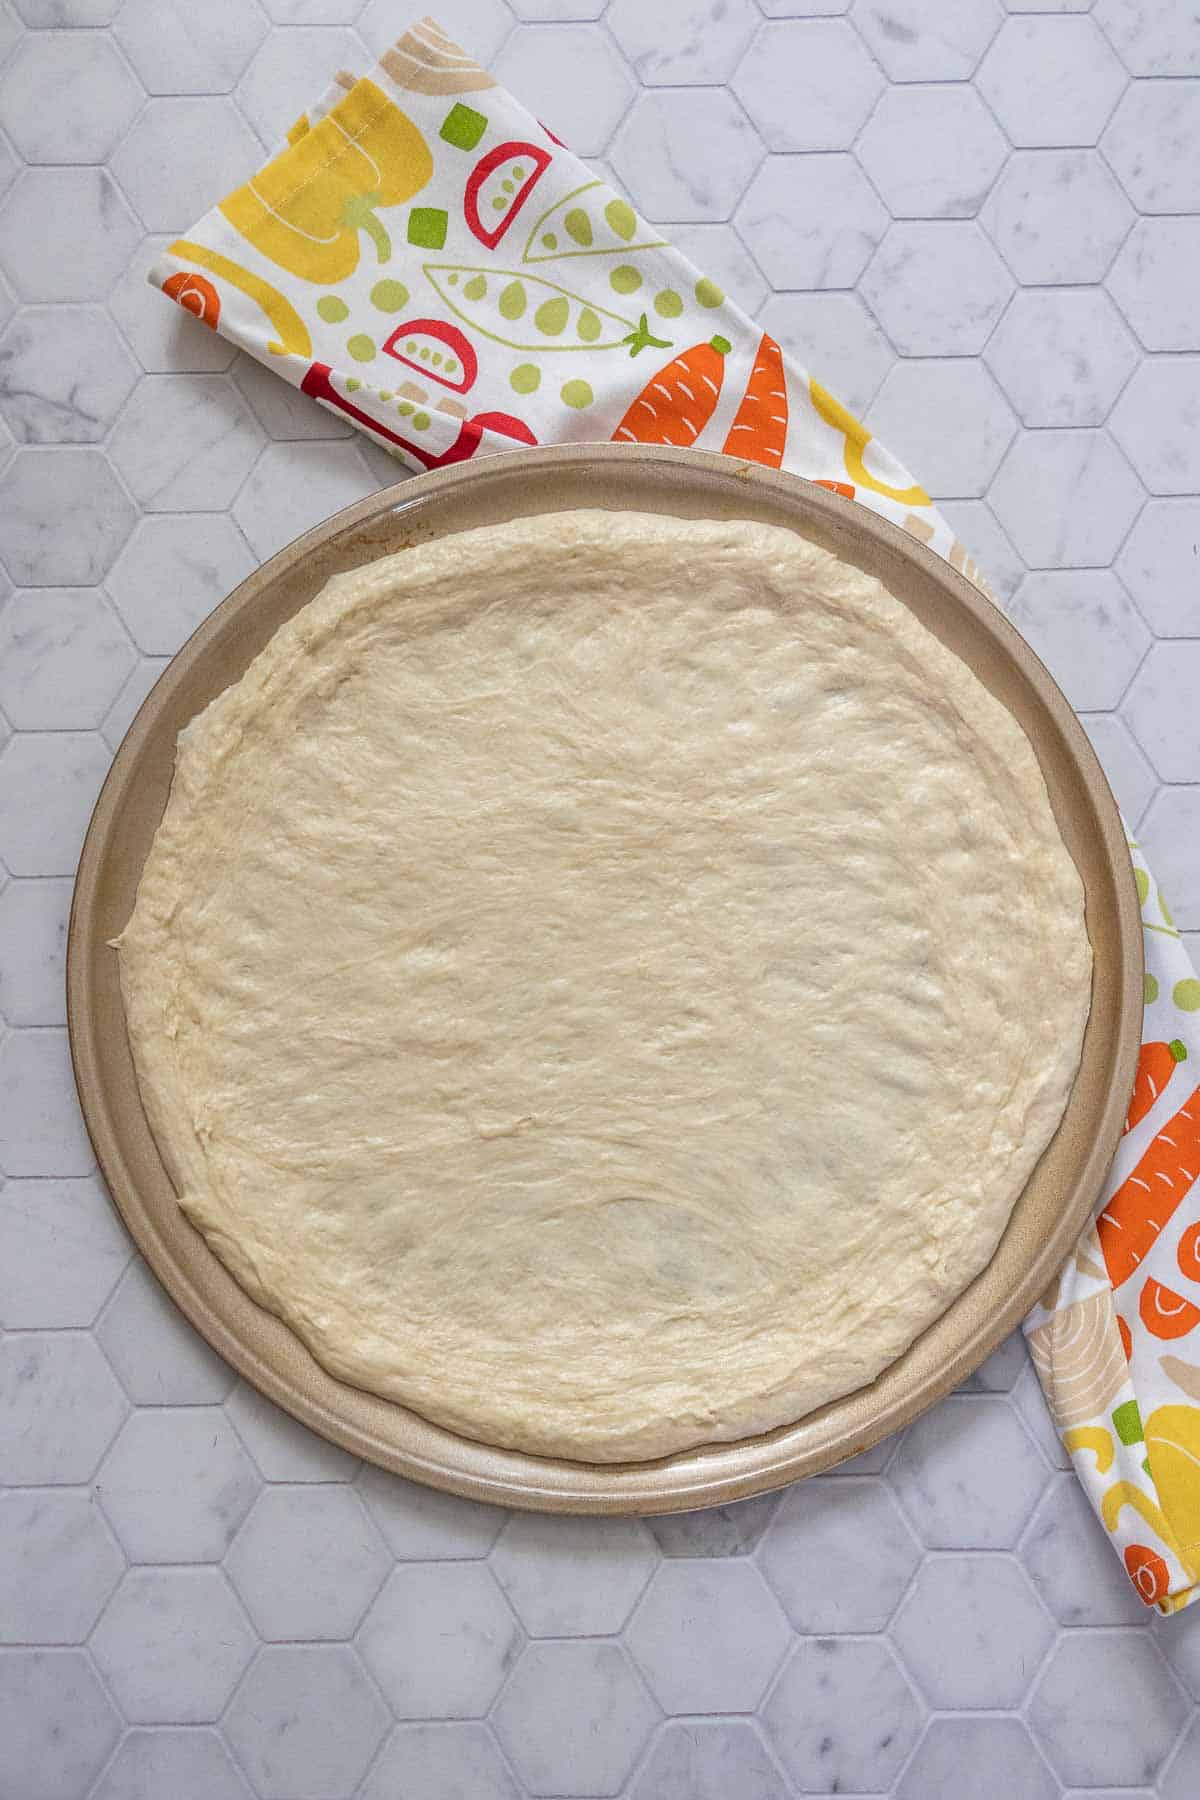 Unbaked pizza dough on a pizza pan with a printed kitchen towel.